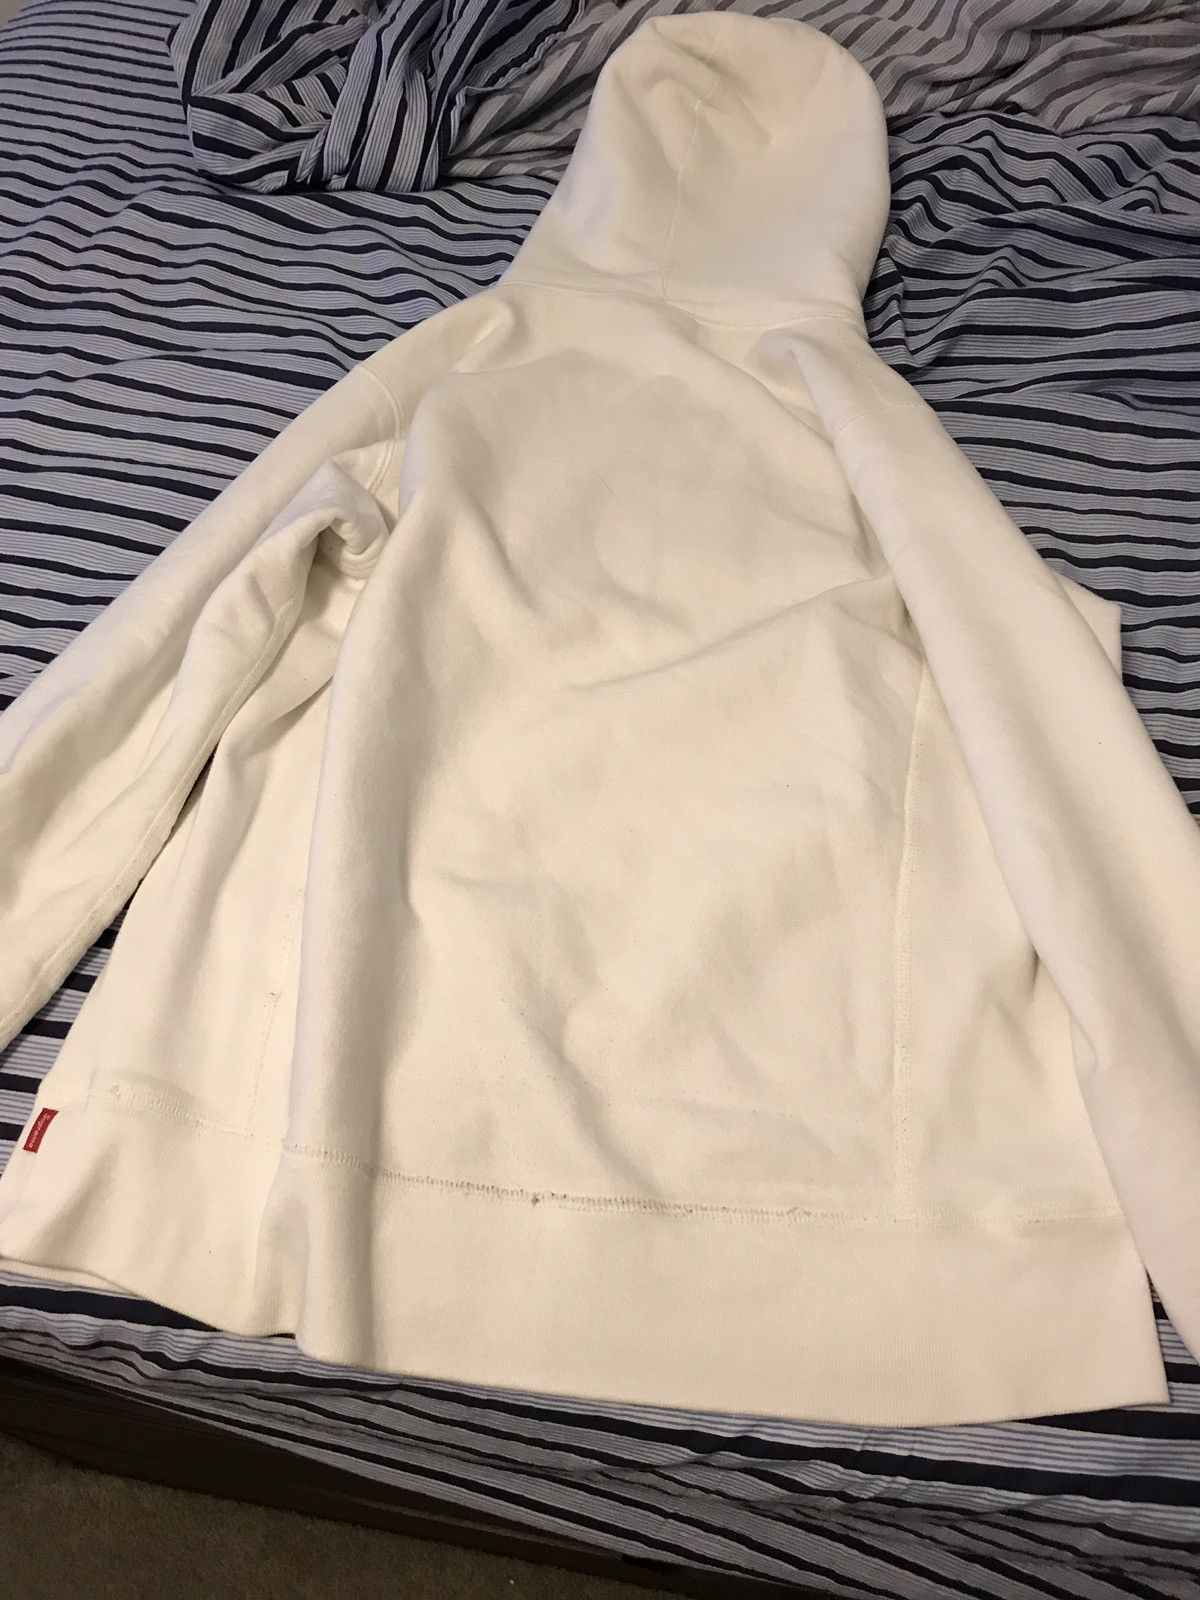 Supreme White Supreme Hoodie With Old Logo Size US M / EU 48-50 / 2 - 6 Preview